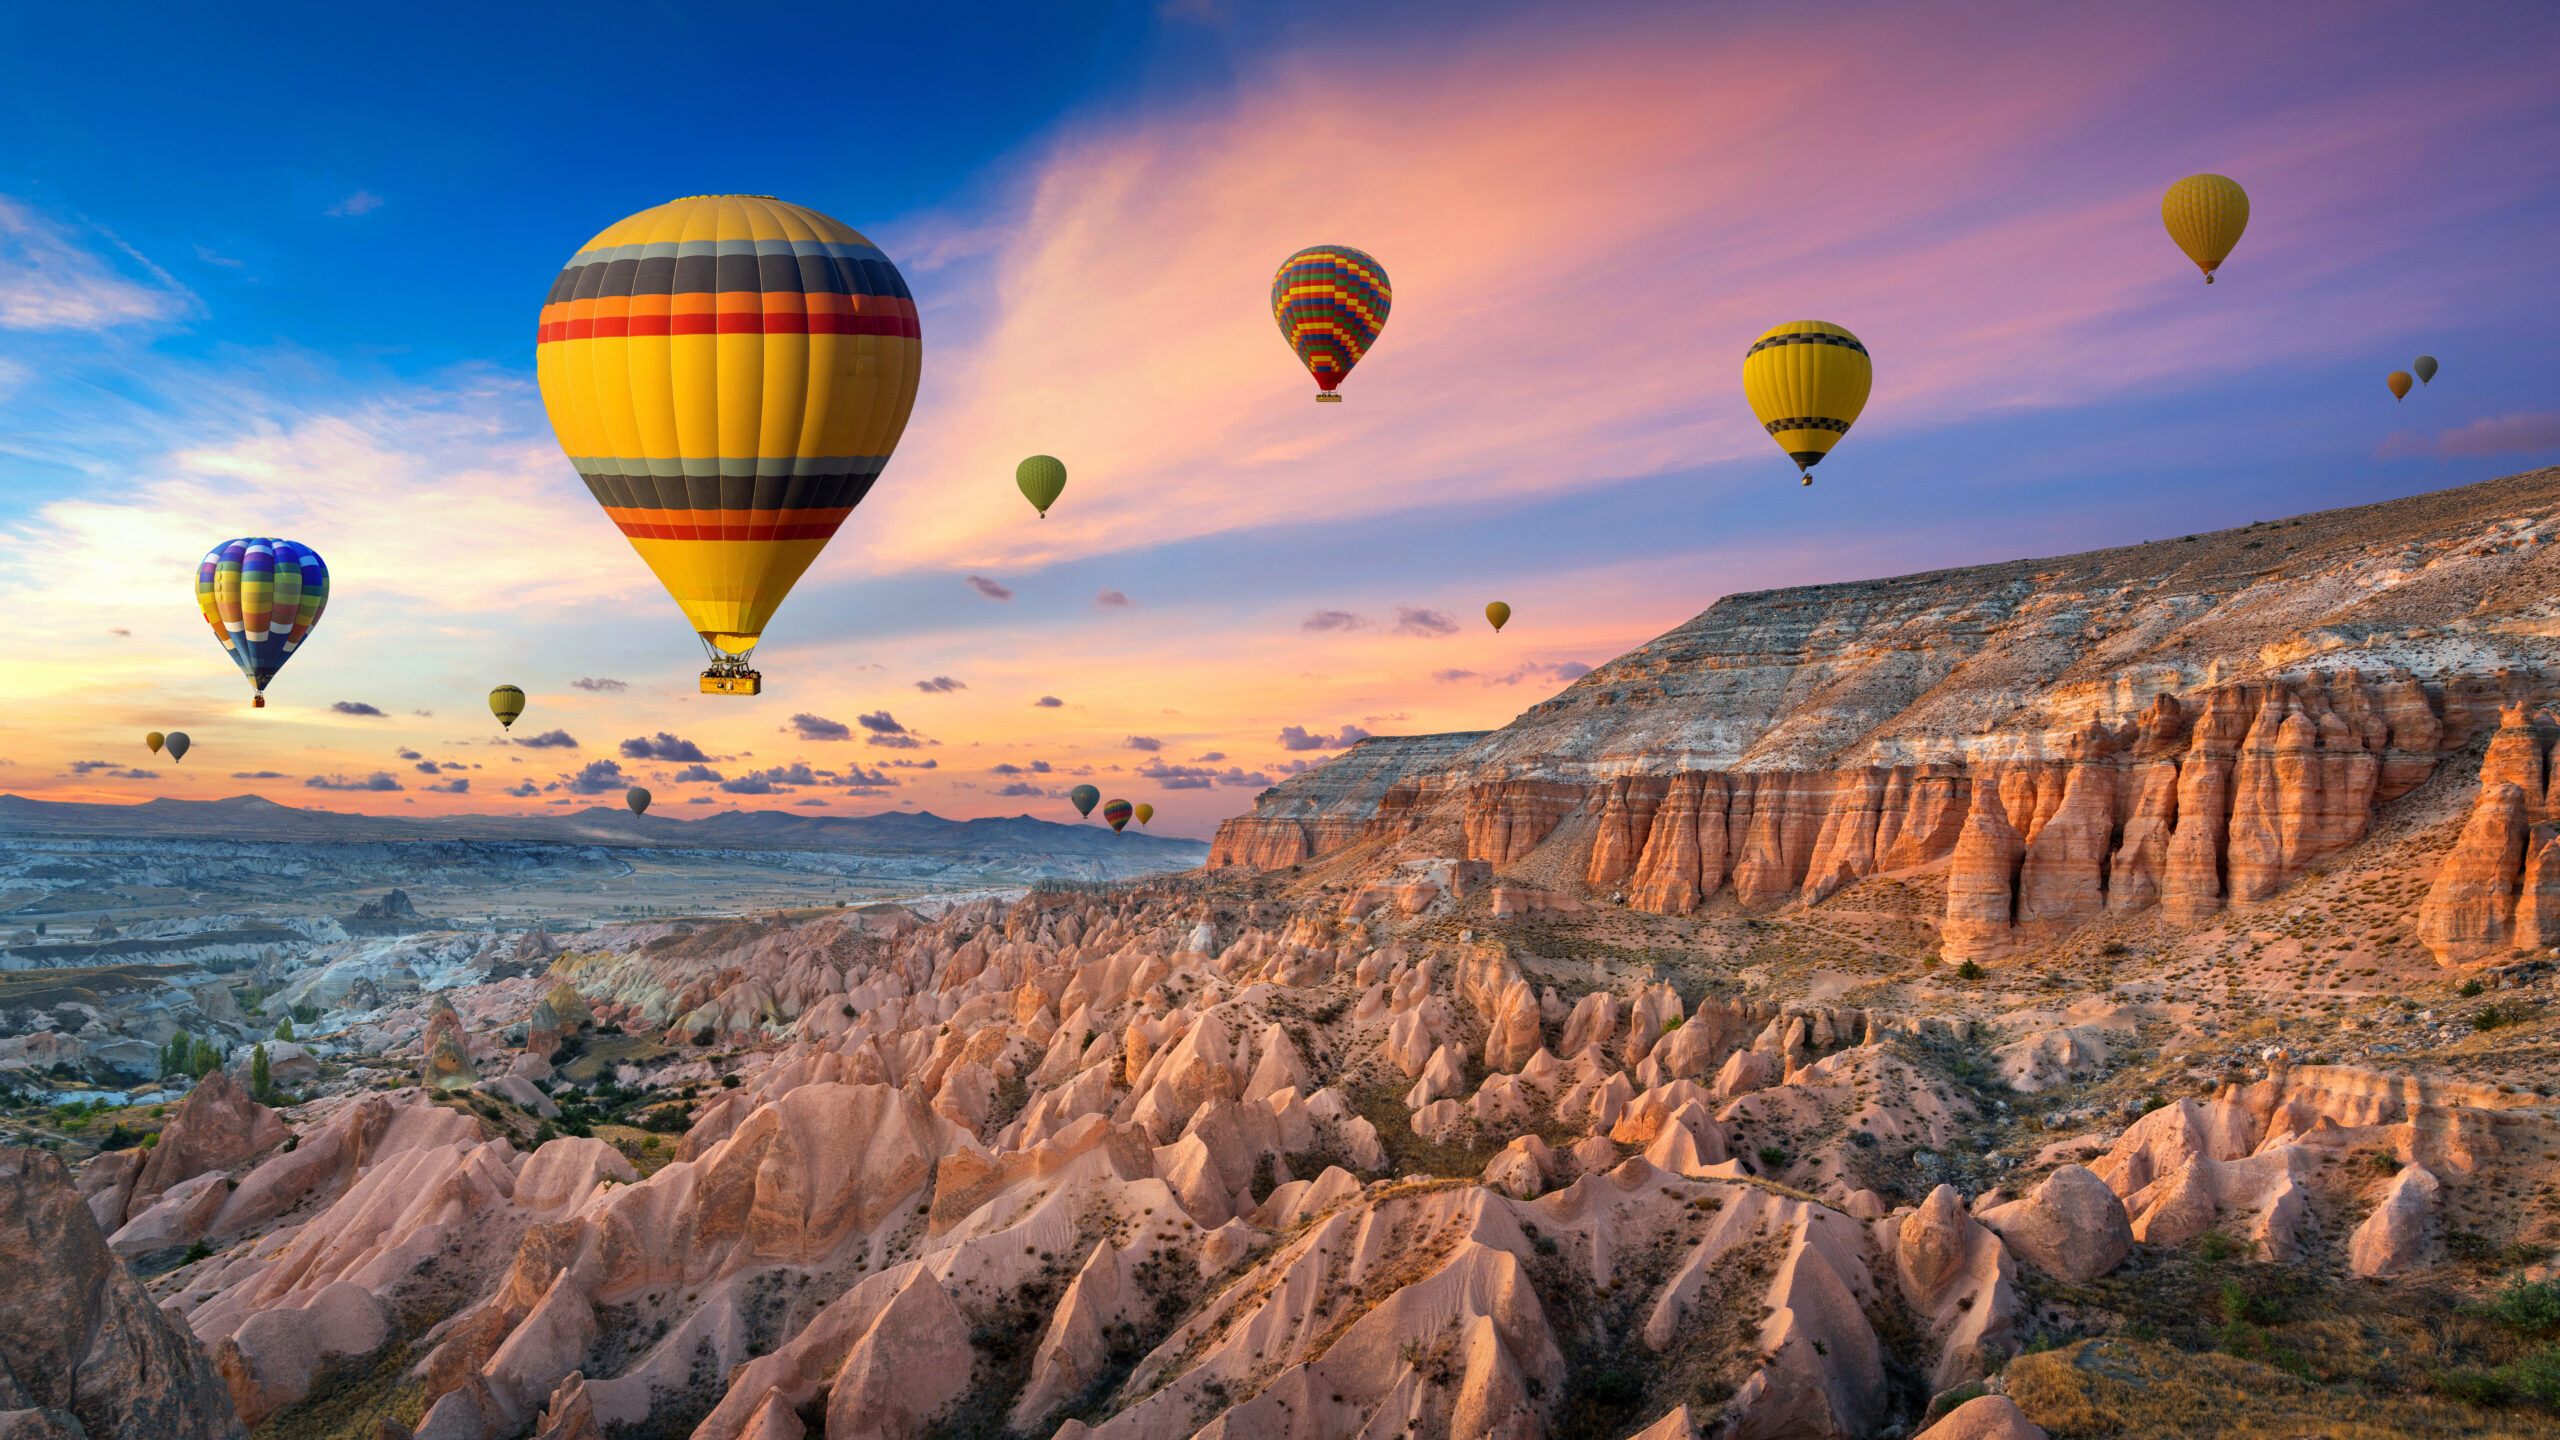 production-services-and-filming-in-turkey-hot-air-balloons-over-valley